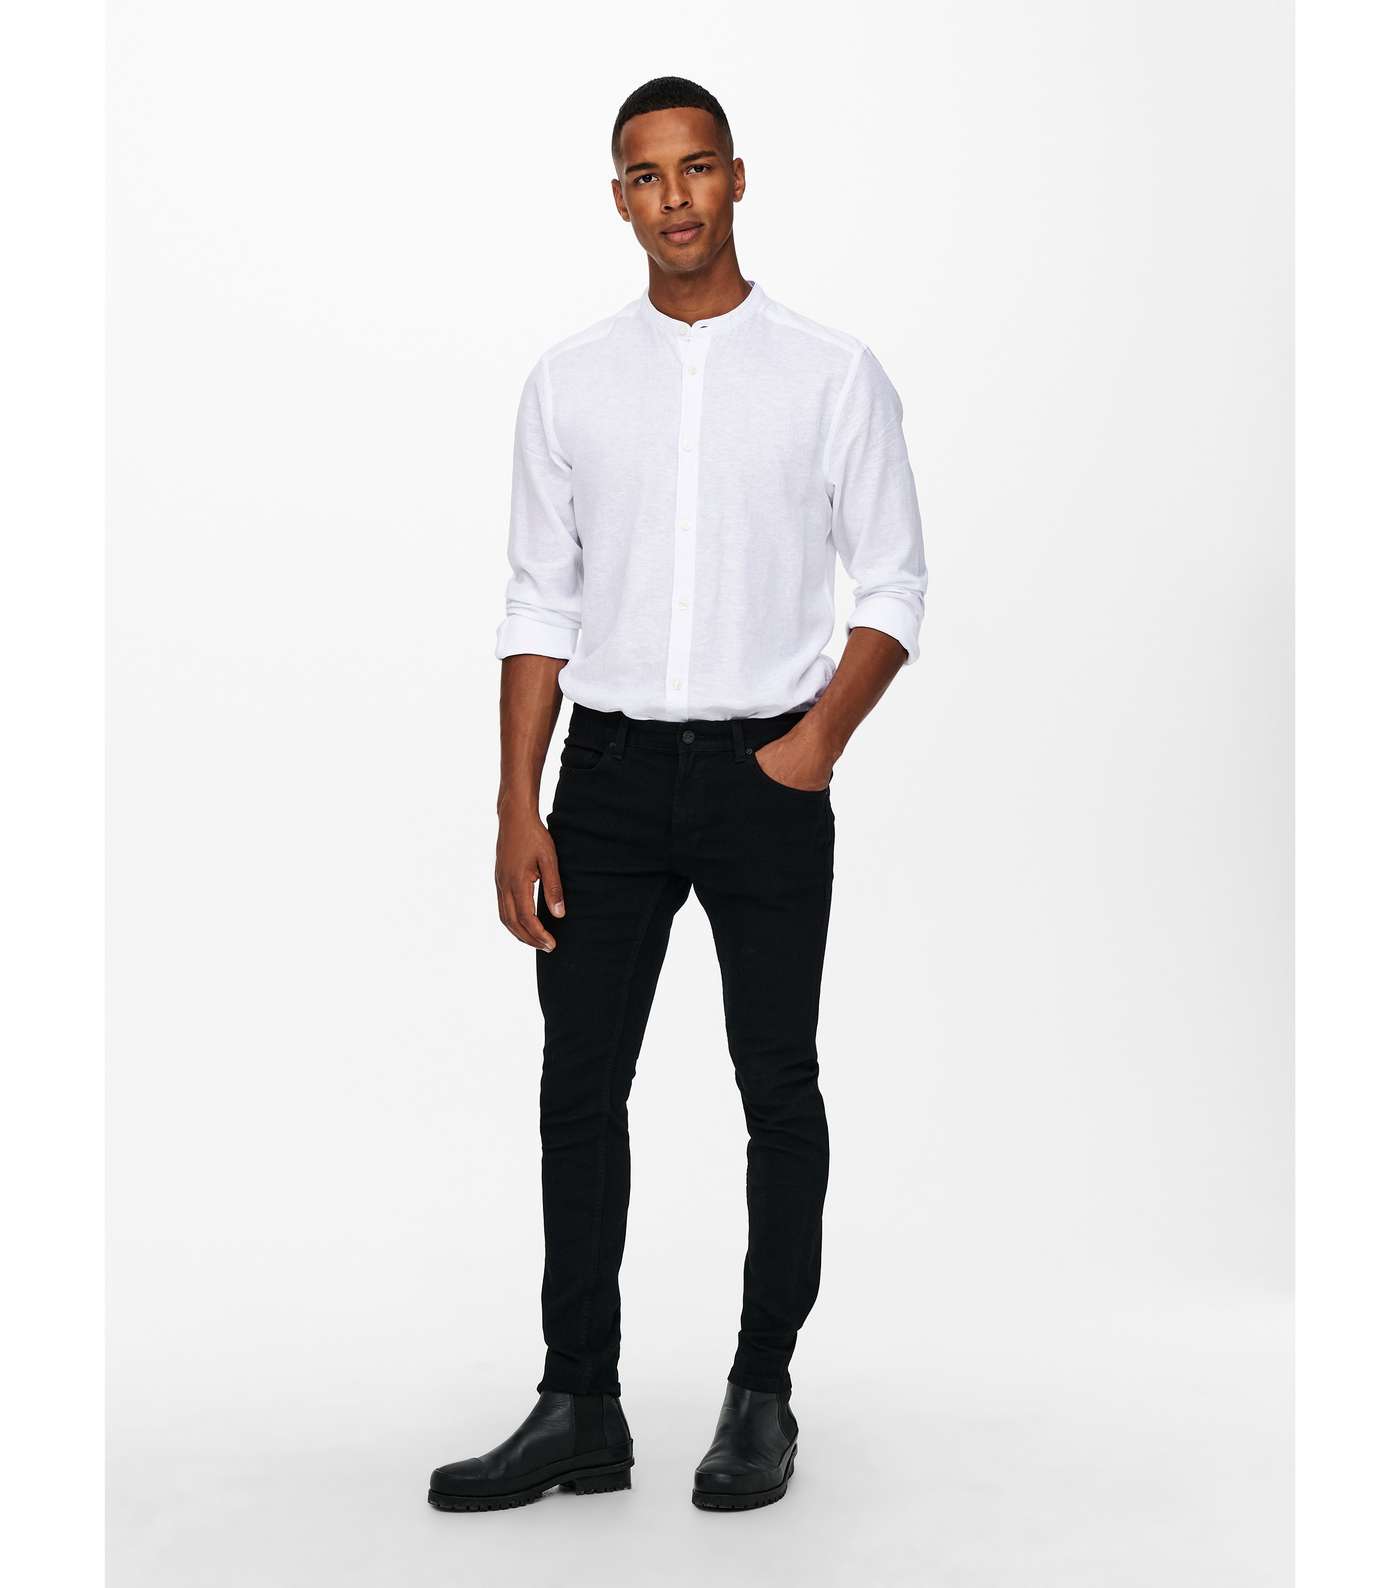 Only & Sons Black Skinny Jeans Image 2